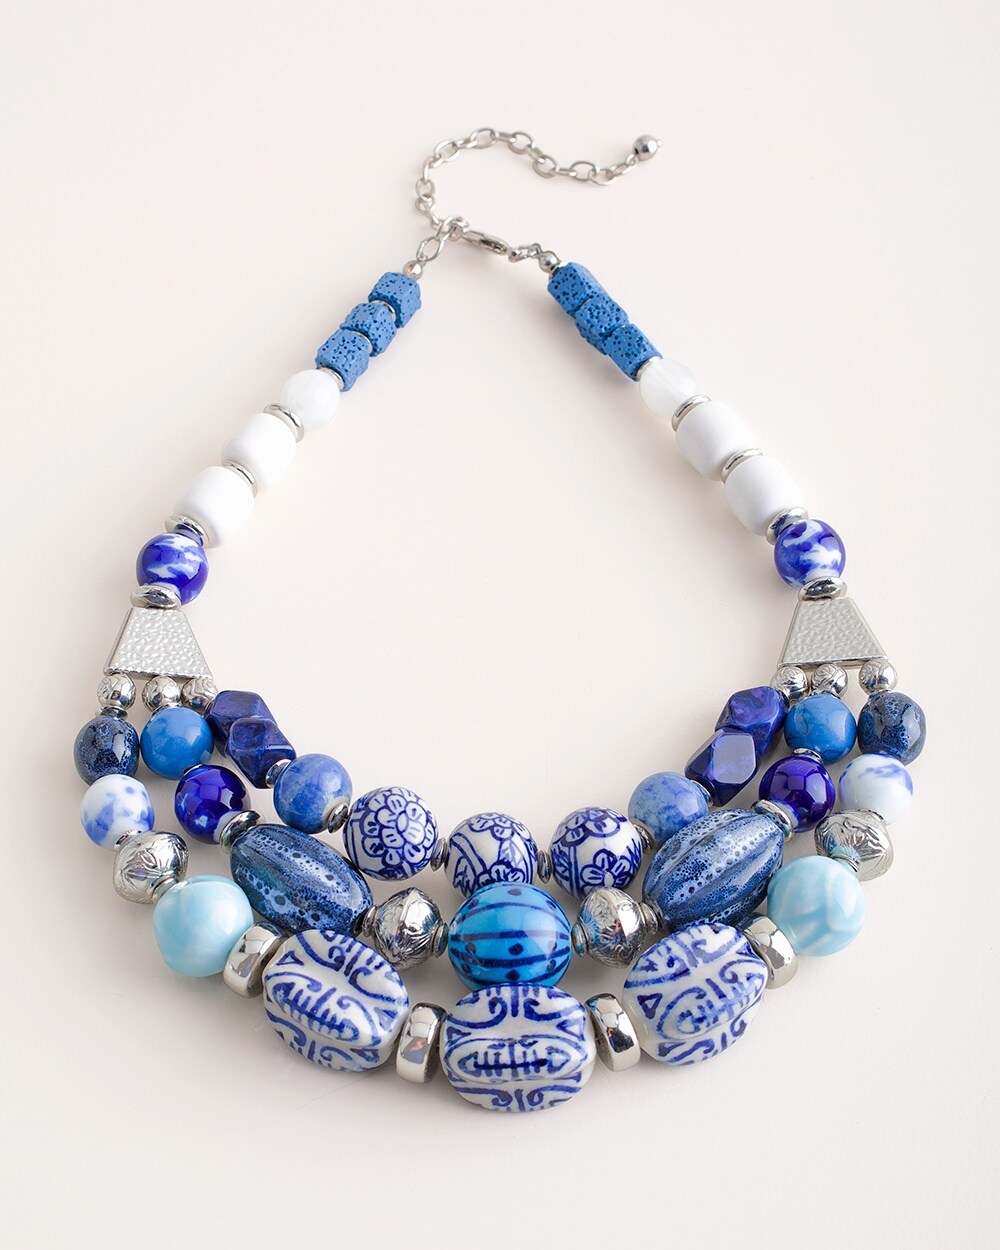 Short Blue and White Beaded Bib Necklace